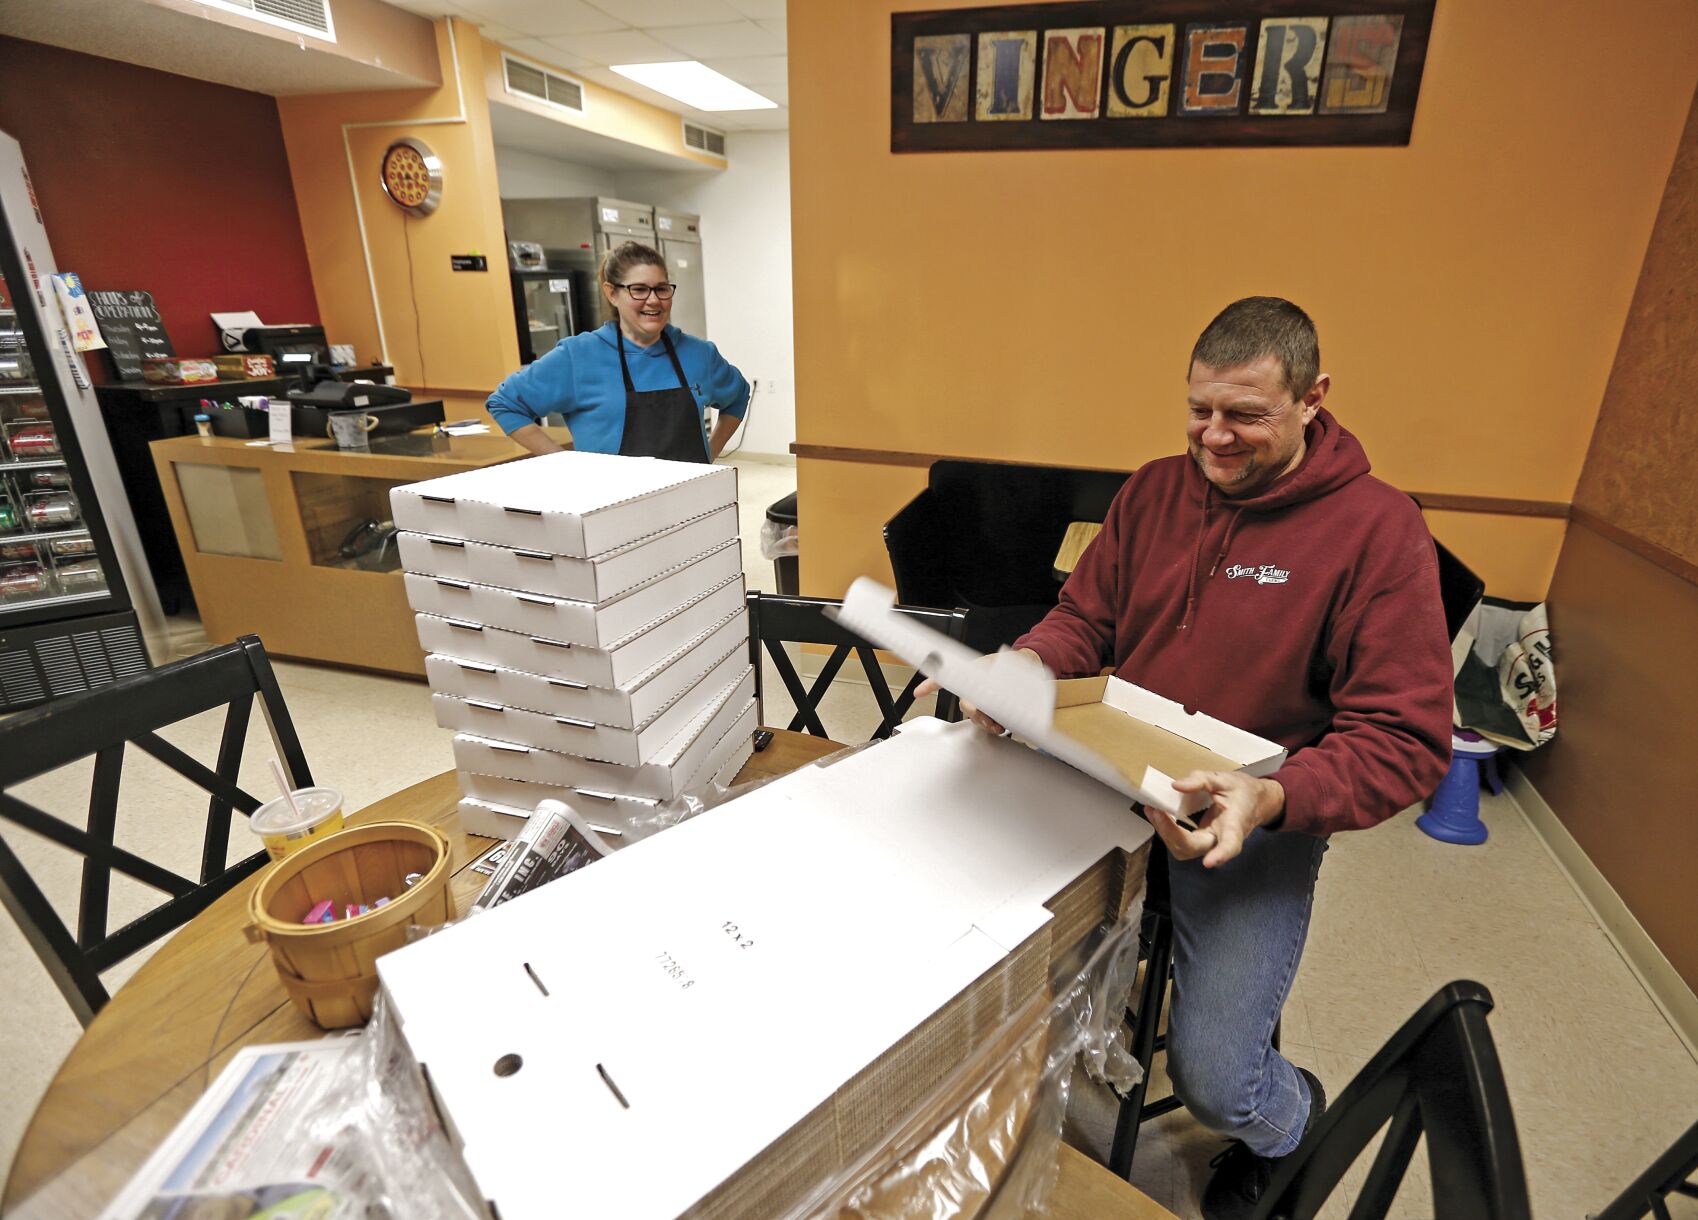 Owners of Vinger’s Pizza in Darlington, Wis., Val Smith and her husband, Steve, get boxes ready before opening Saturday.    PHOTO CREDIT: Dave Kettering